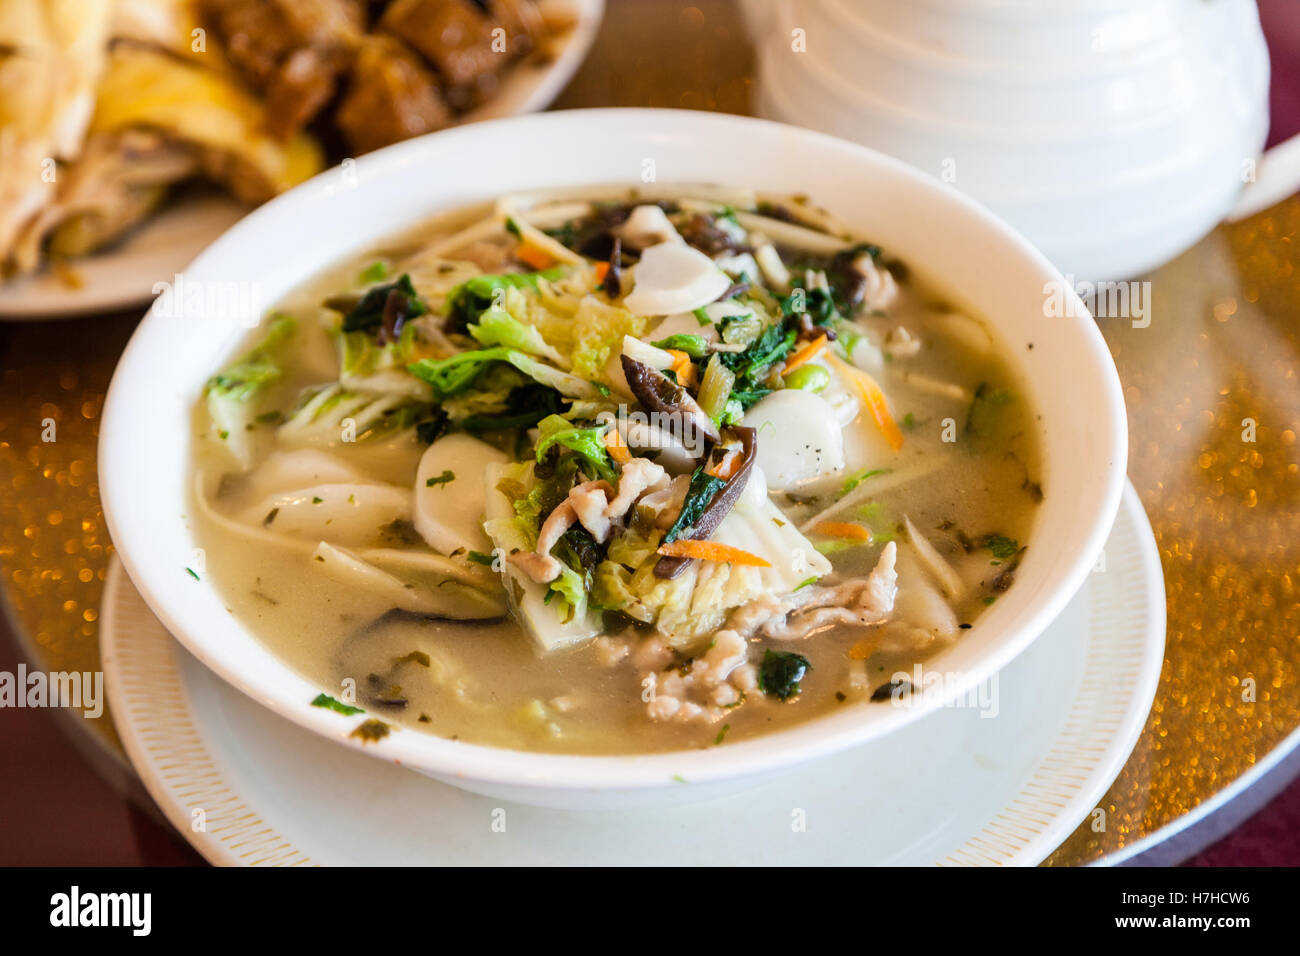 Traditional Chinese rice cake in broth with cabbage, mushroom, carrots and pork. Stock Photo